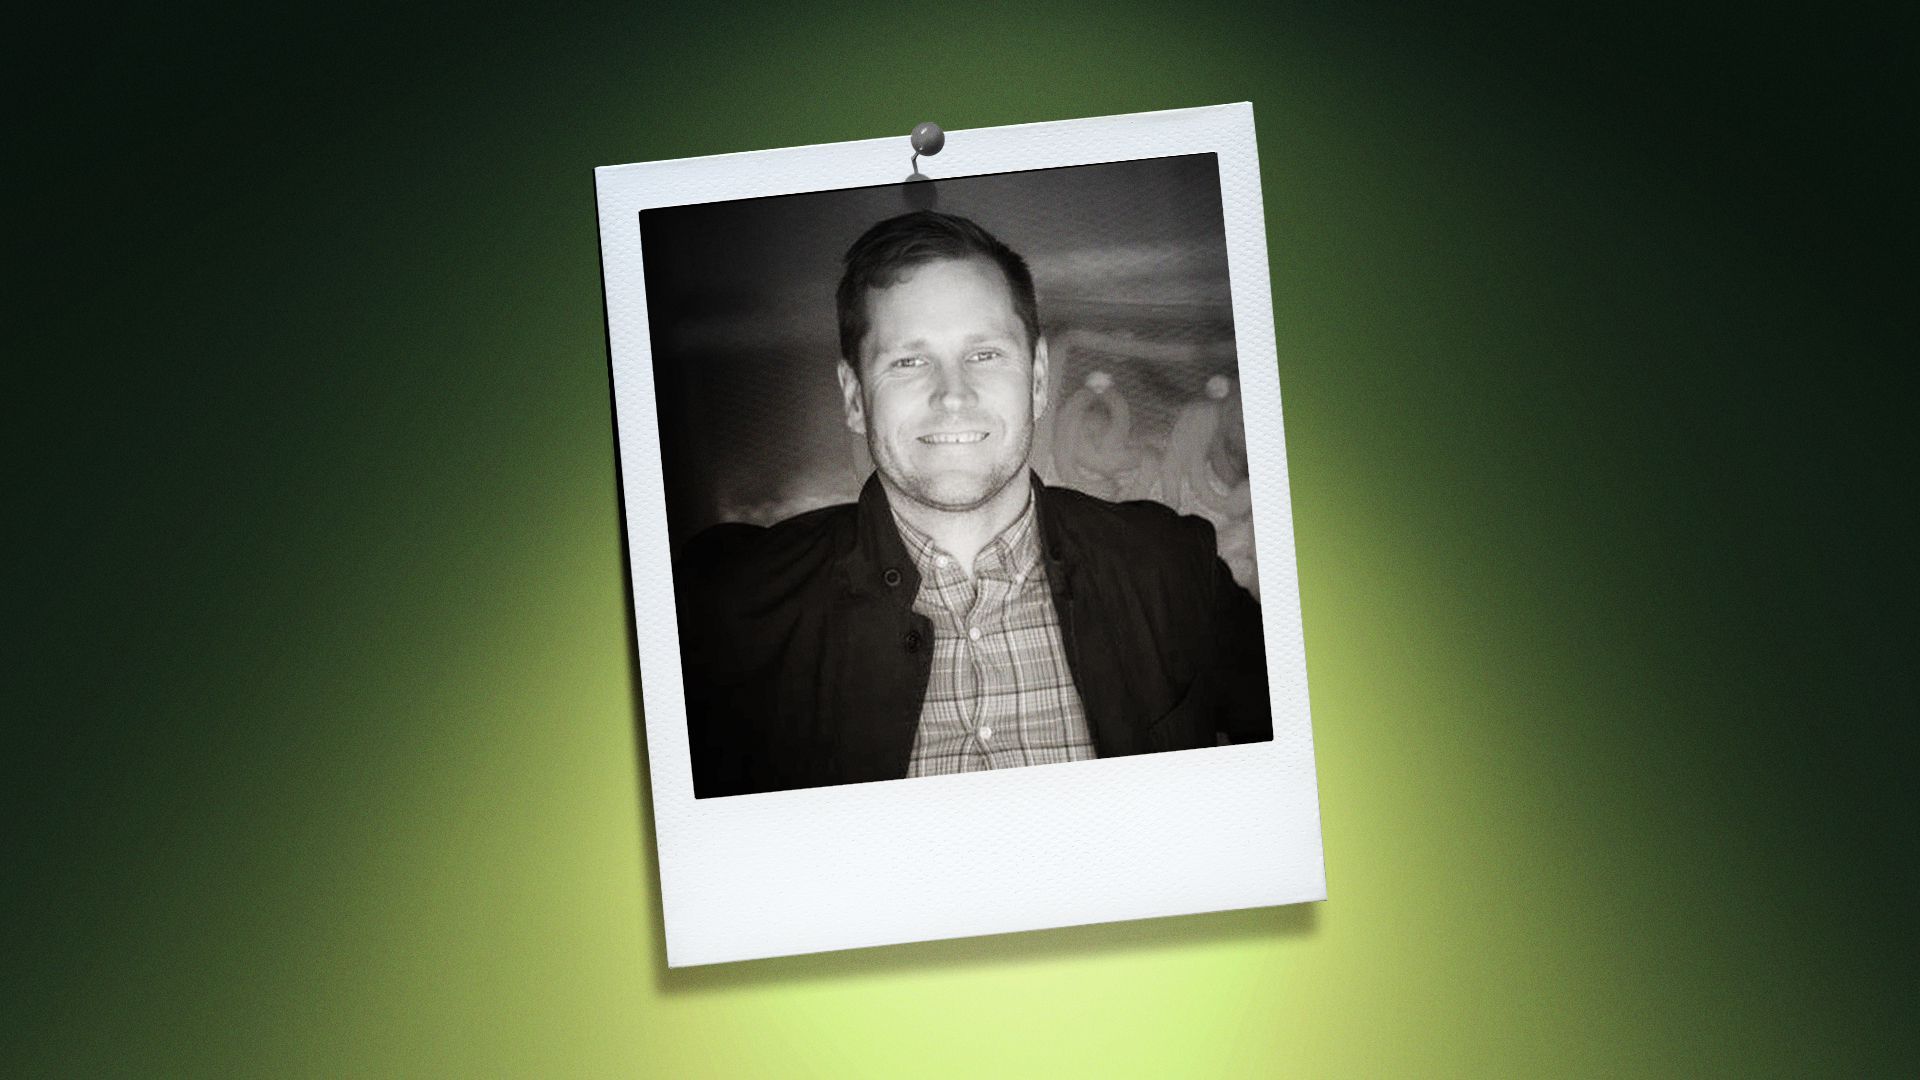 Photo illustration of David Meeker in the center of a Polaroid photo under a green spotlight.